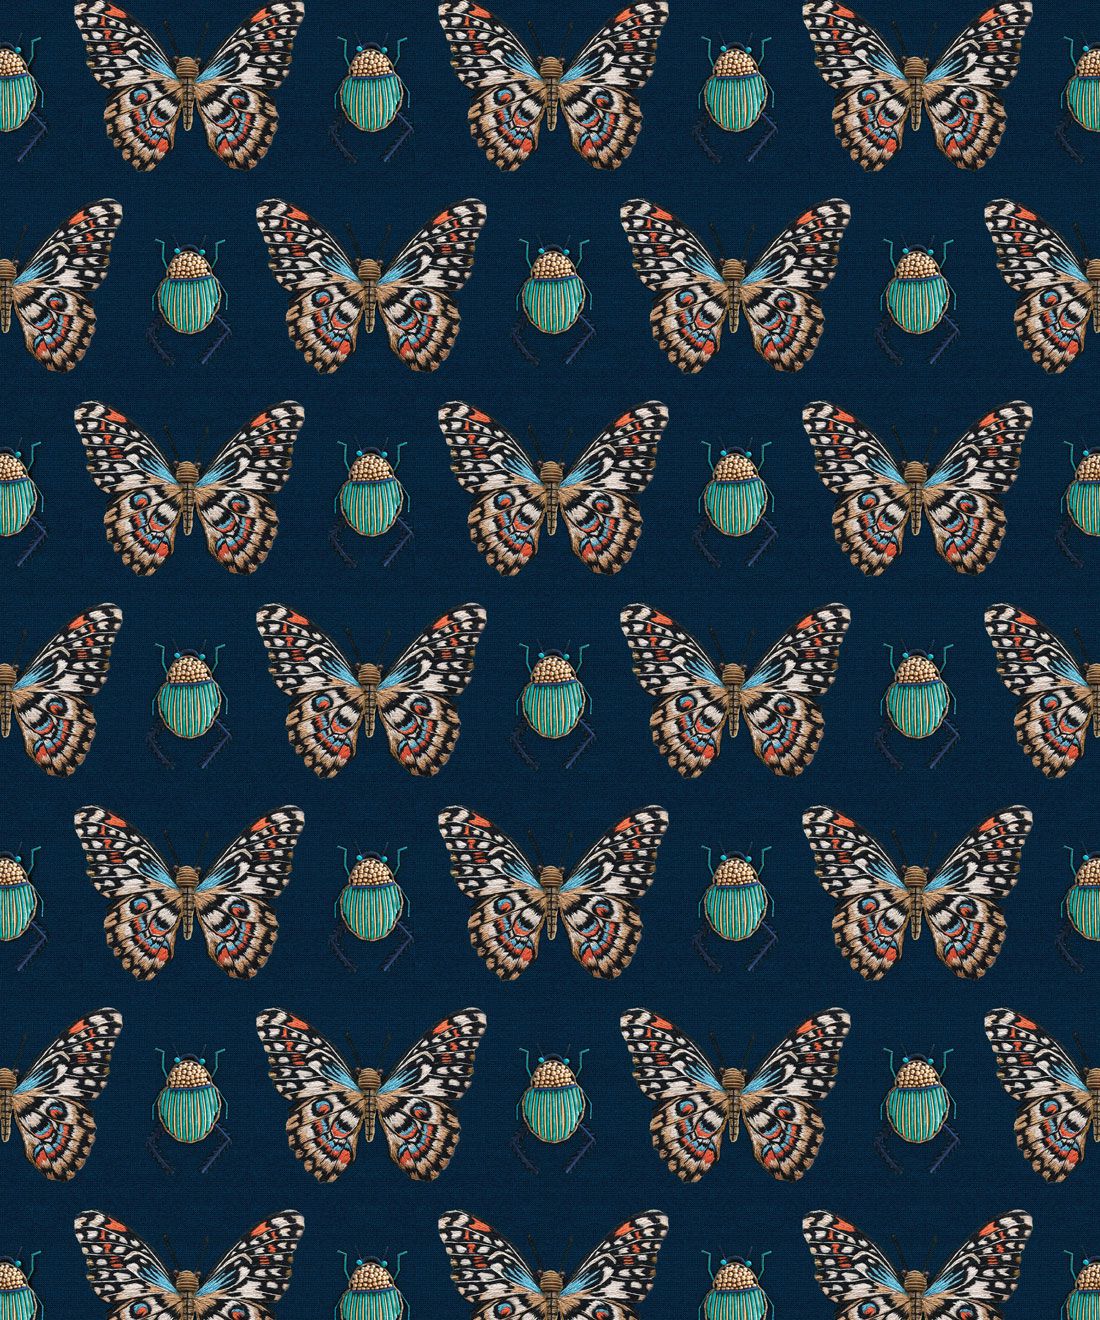 Beetle & Butterfly Wallpaper • Handcrafted USA